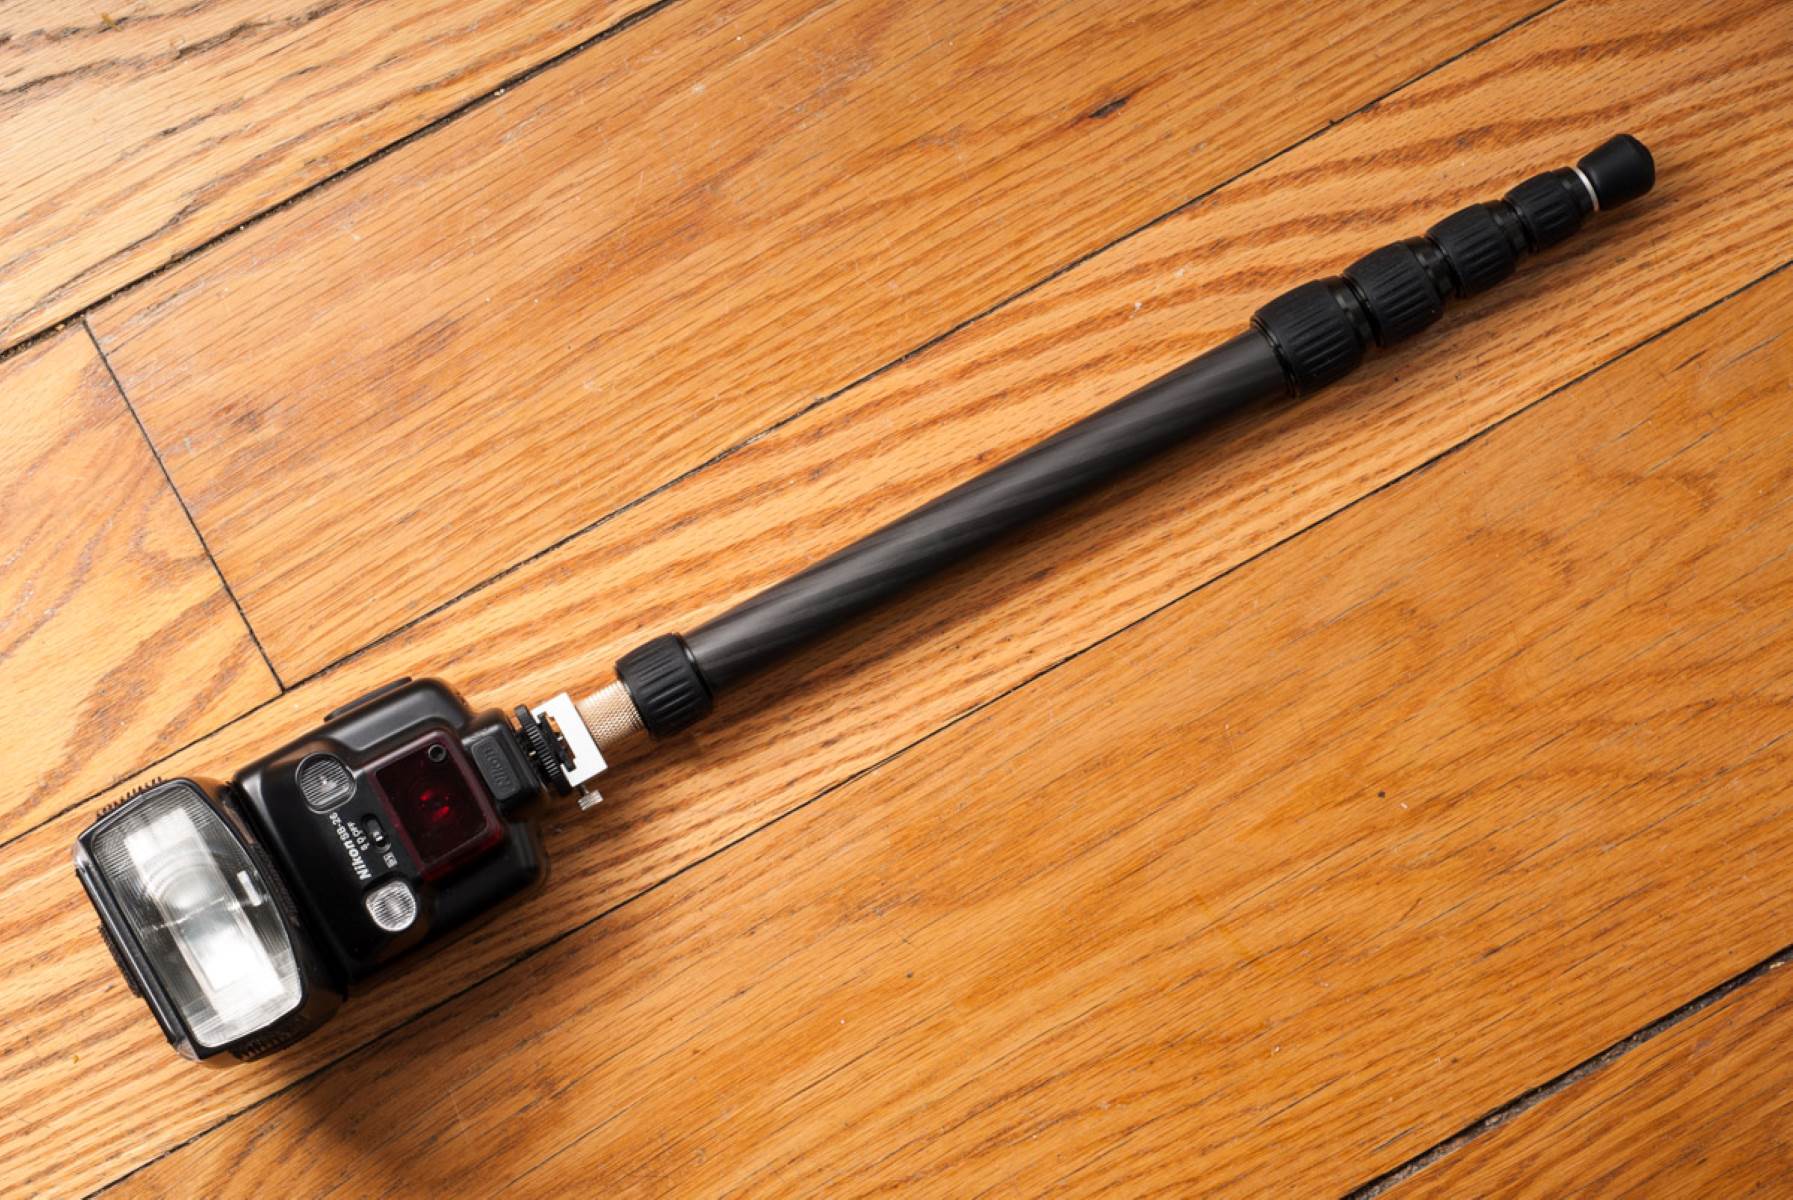 Attaching A Speedlight To Your Monopod: A Practical Guide